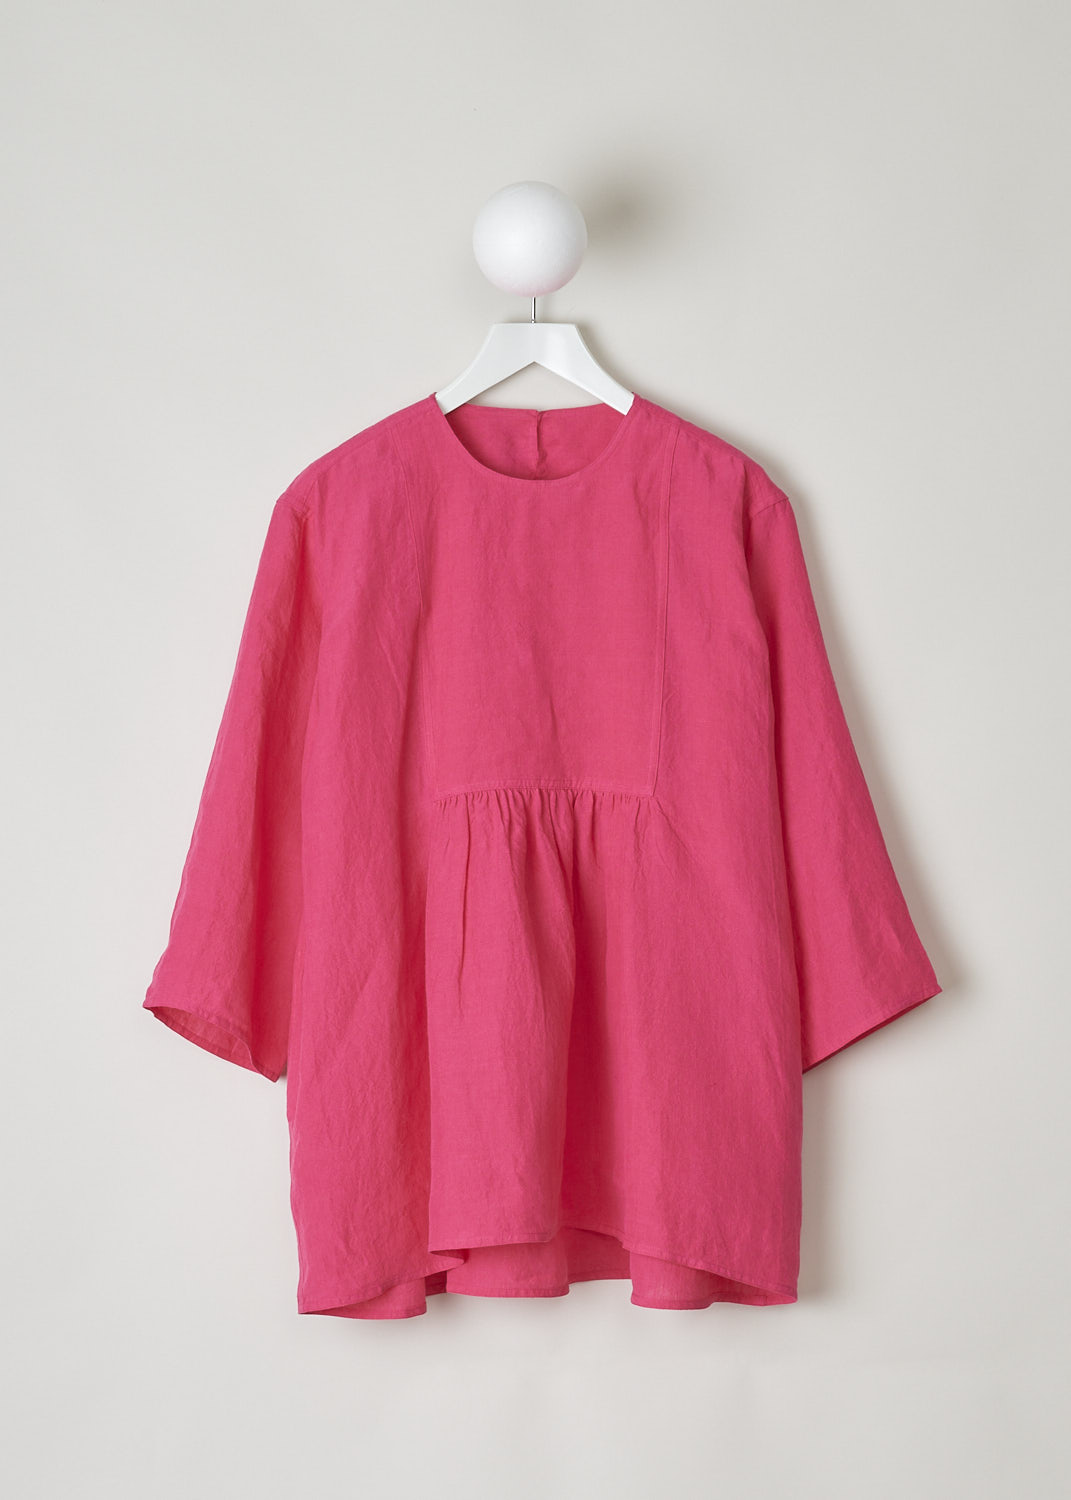 SOFIE Dâ€™HOORE, FUCHSIA COLORED BINETTE TOP, BINETTE_LIFE_FUCHSIA, Pink, Front, This oversized fuchsia top features a round neckline, dropped shoulders and long sleeves. The A-line top has a square bib-like front with pleated details below. Concealed in the side seams, slanted pockets can be found. The top has an asymmetrical finish, meaning the back is a little longer than the front. 

